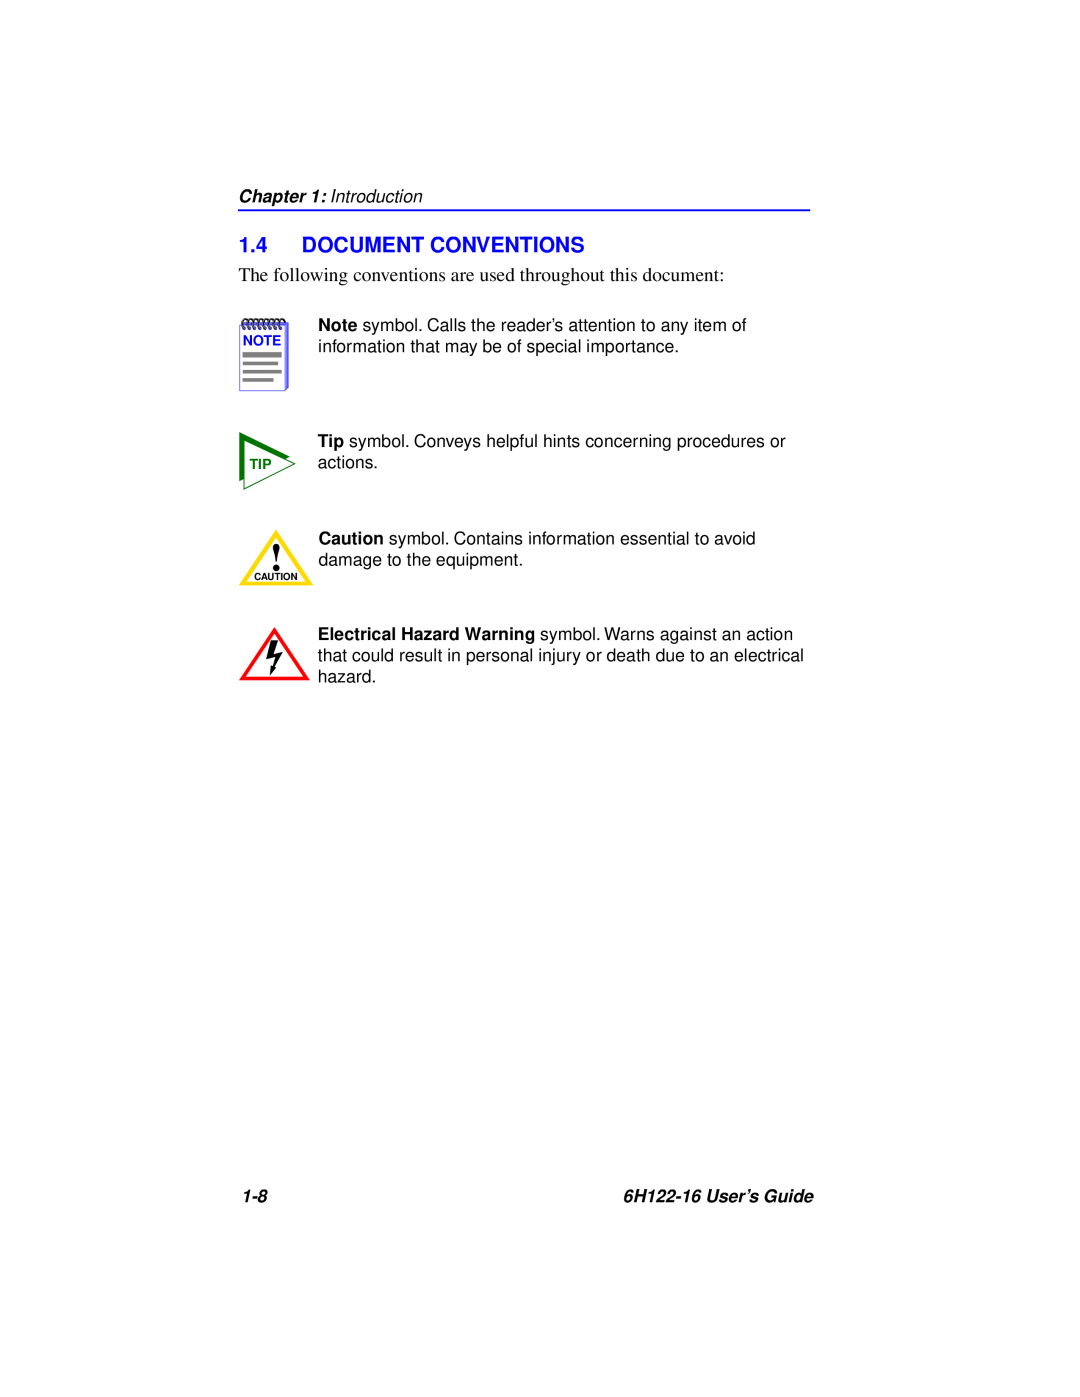 Cabletron Systems 6H122-16 Document Conventions, The following conventions are used throughout this document, Introduction 